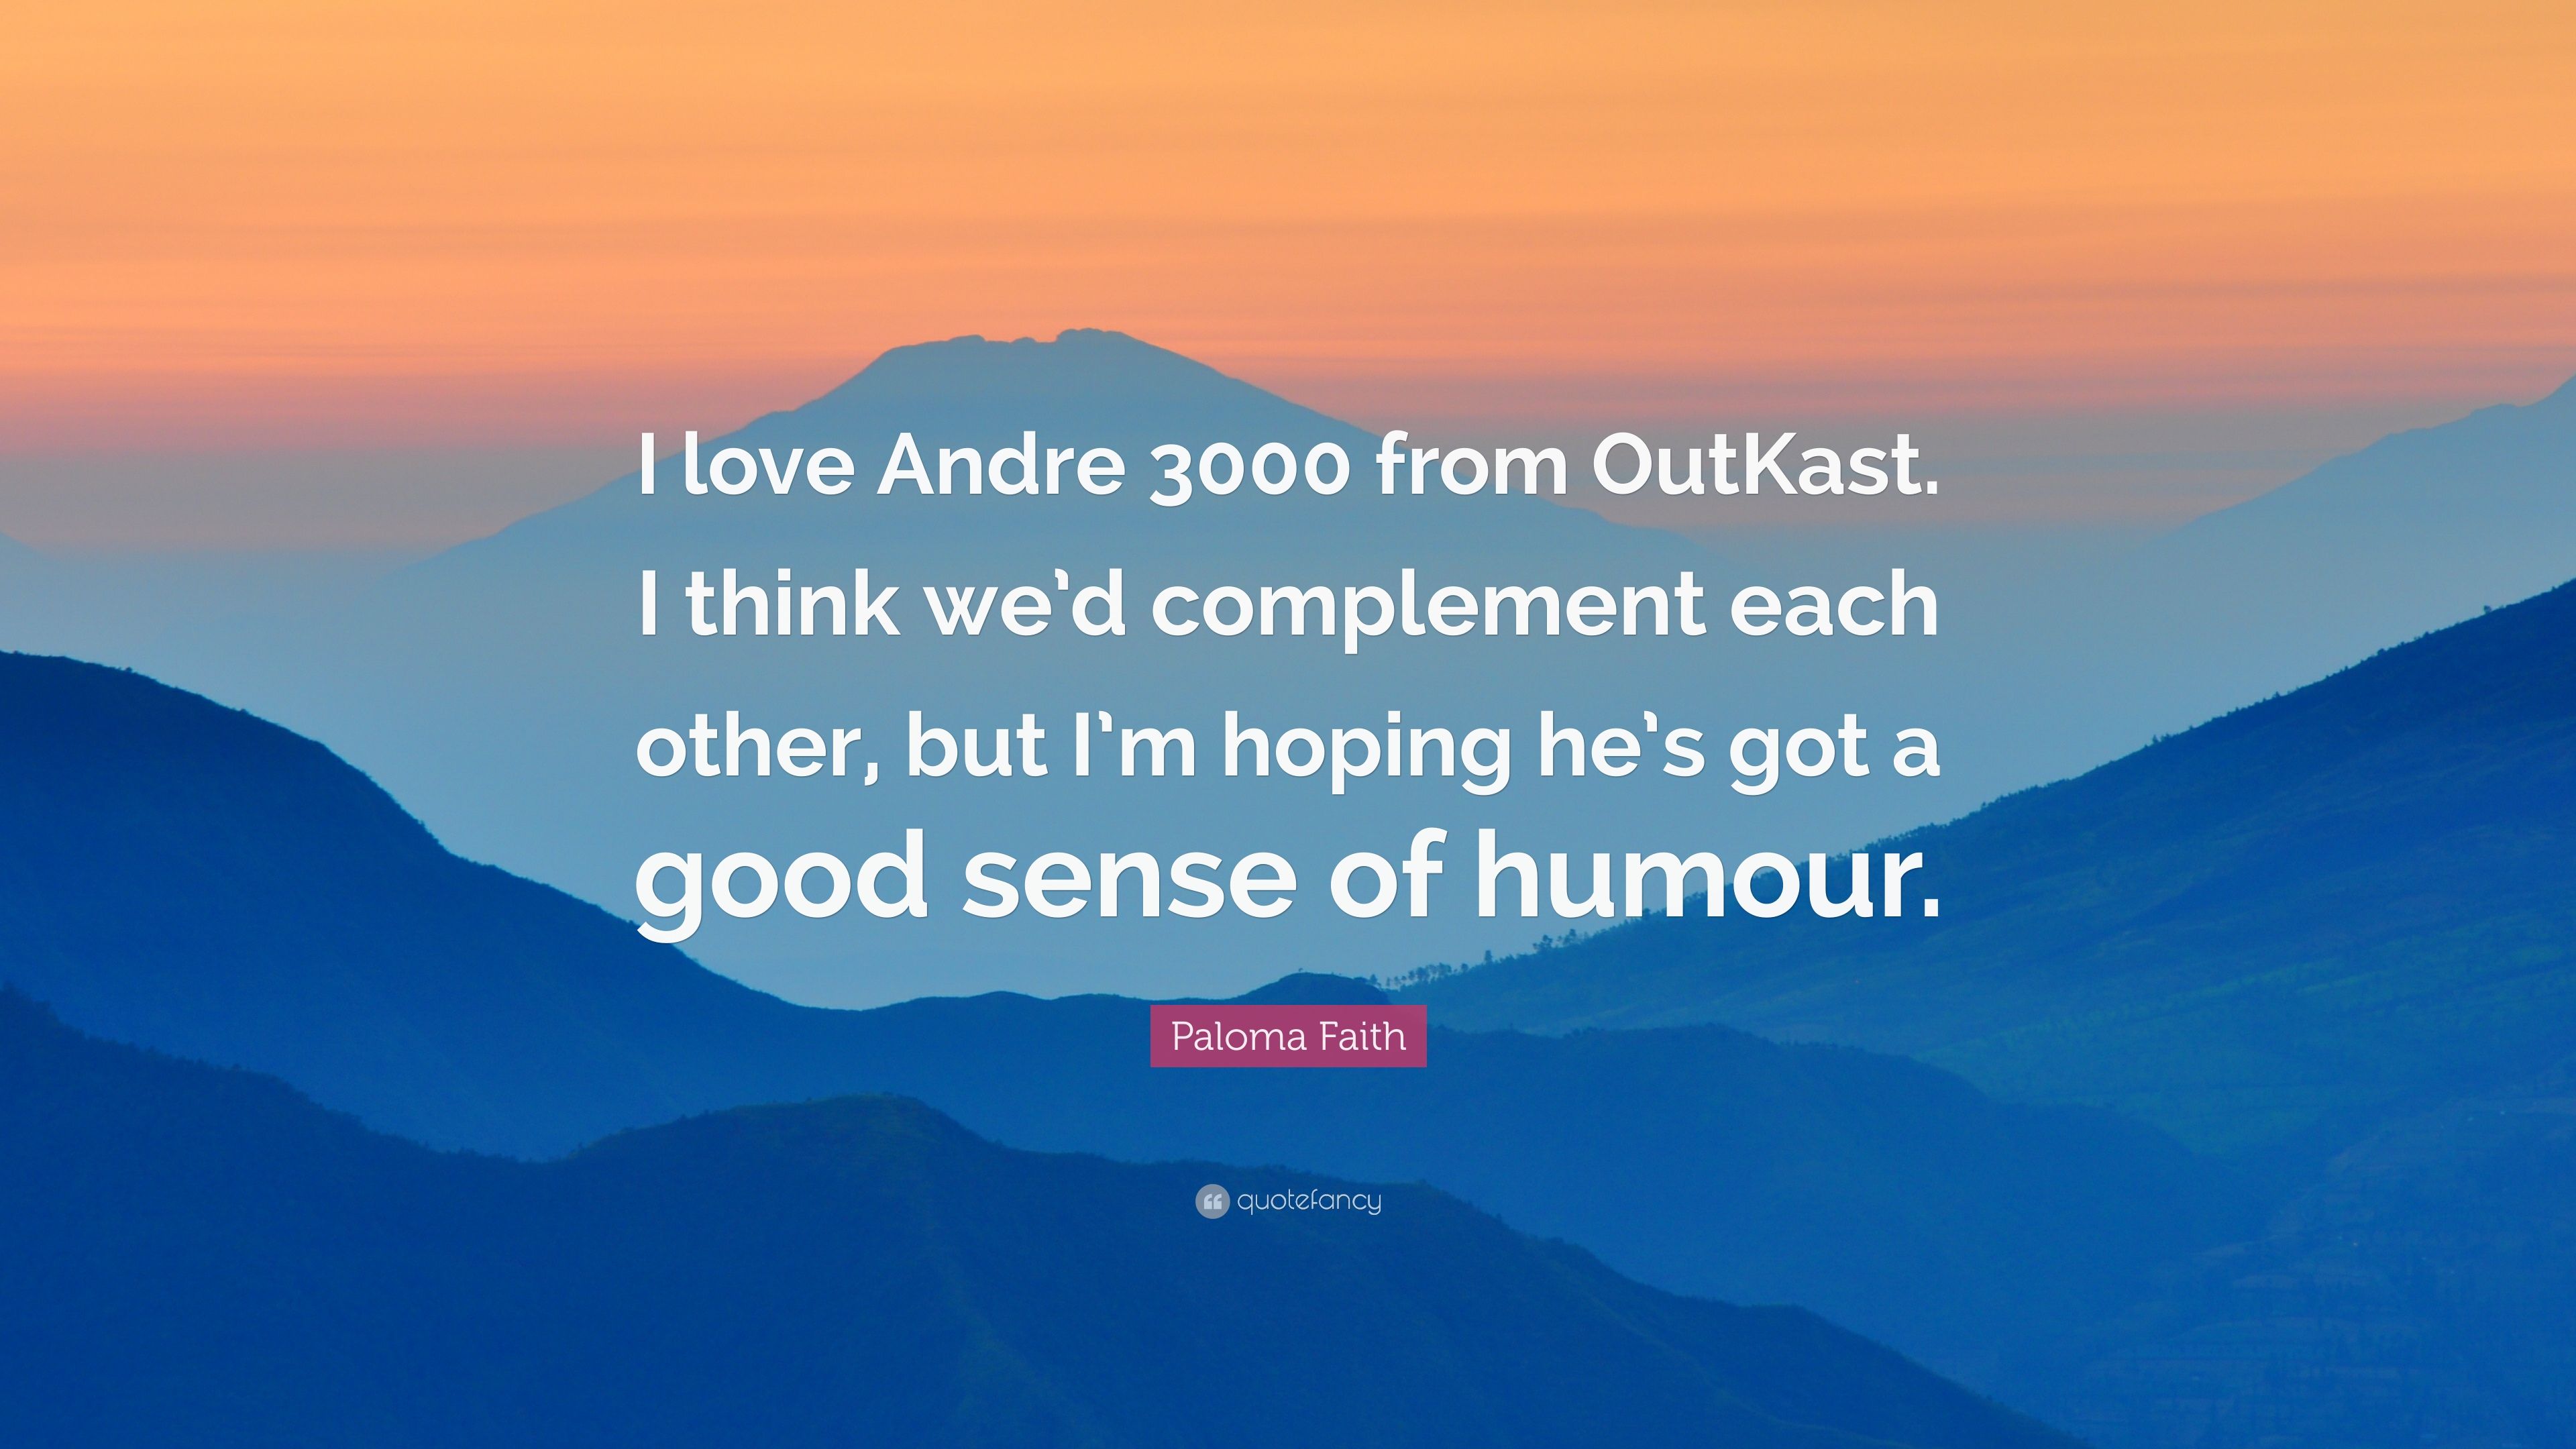 Paloma Faith Quote: “I love Andre 3000 from OutKast. I think we'd